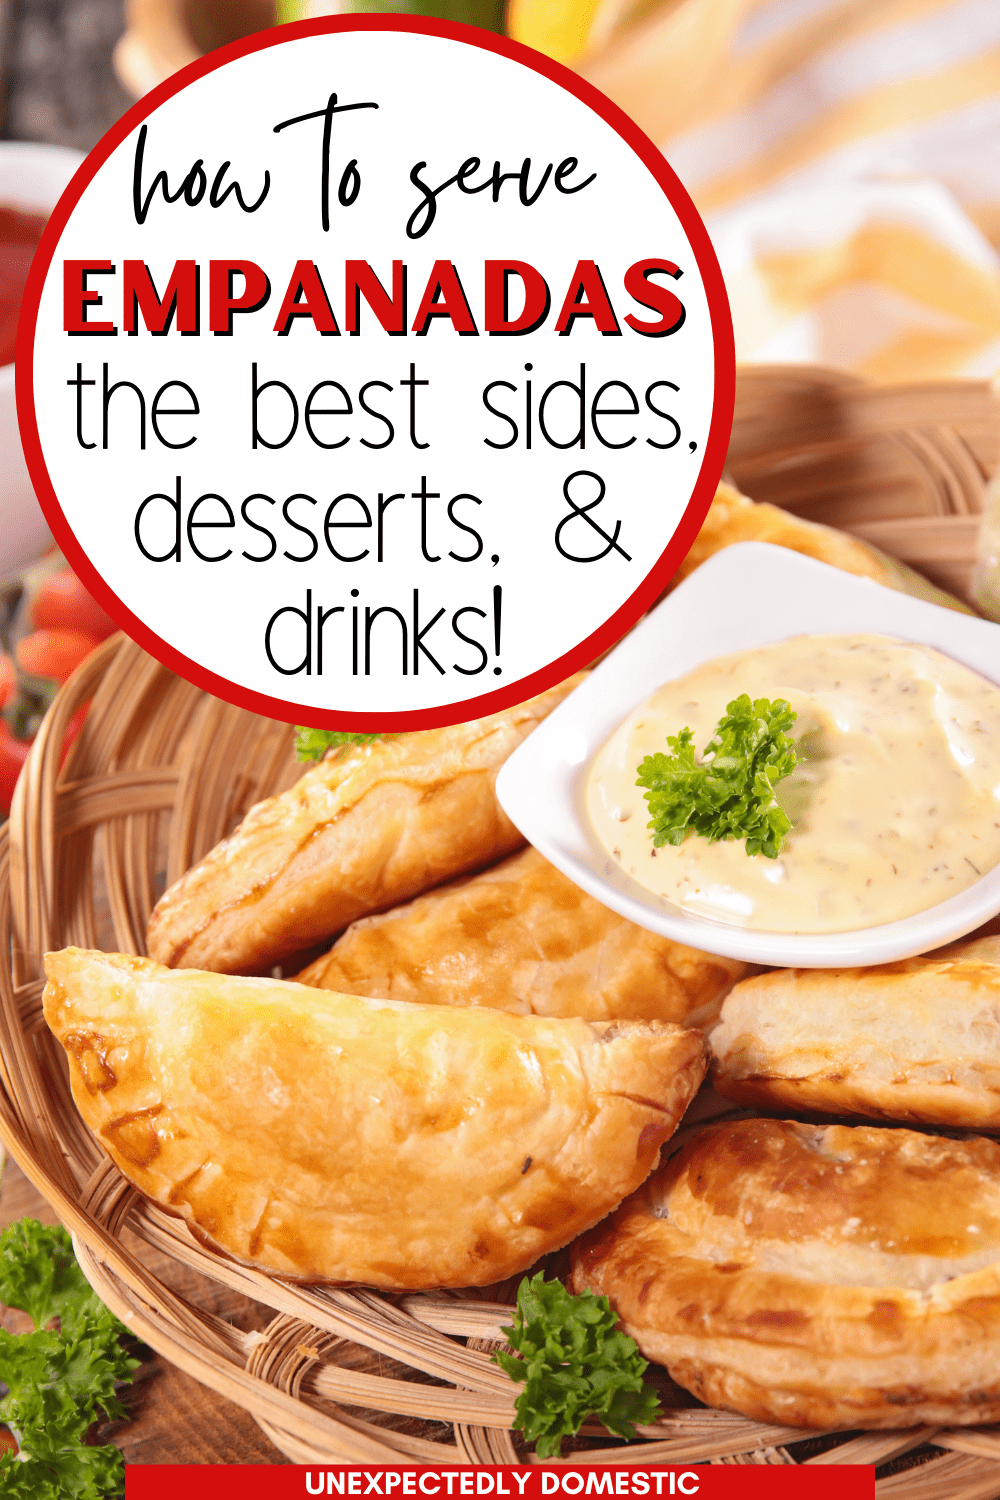 What to Serve with Empanadas (23 Festive Sides, Desserts, & Drinks!)